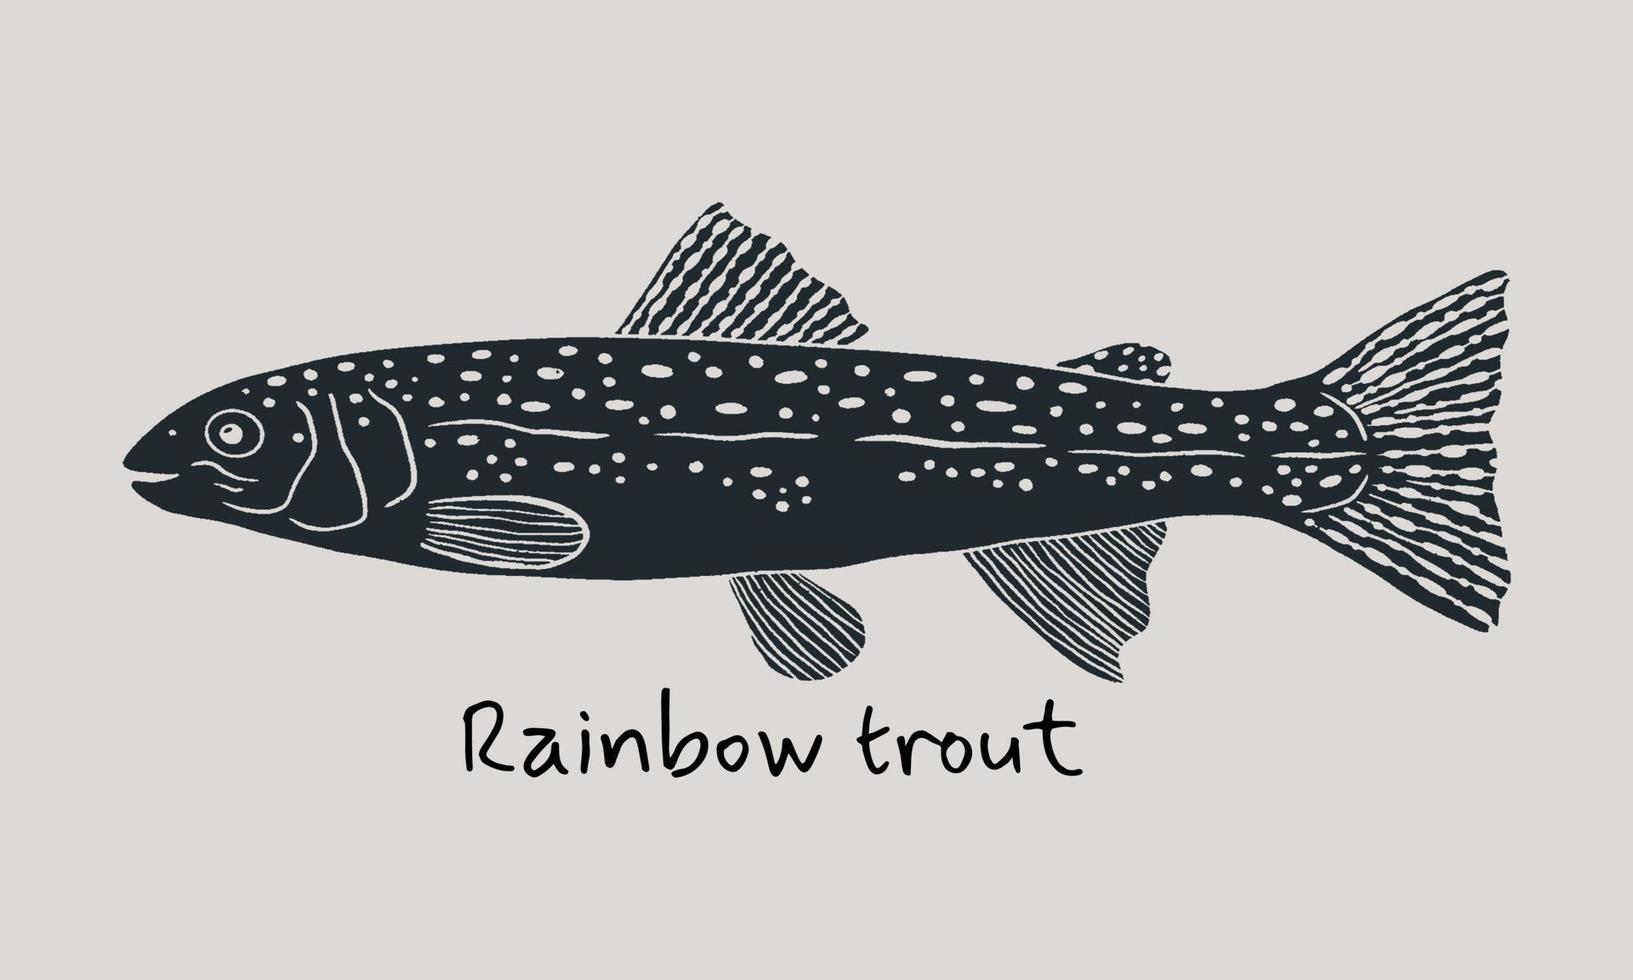 Hand drawn rainbow trout fish in sketch style. Simple vector isolated illustration on beige background